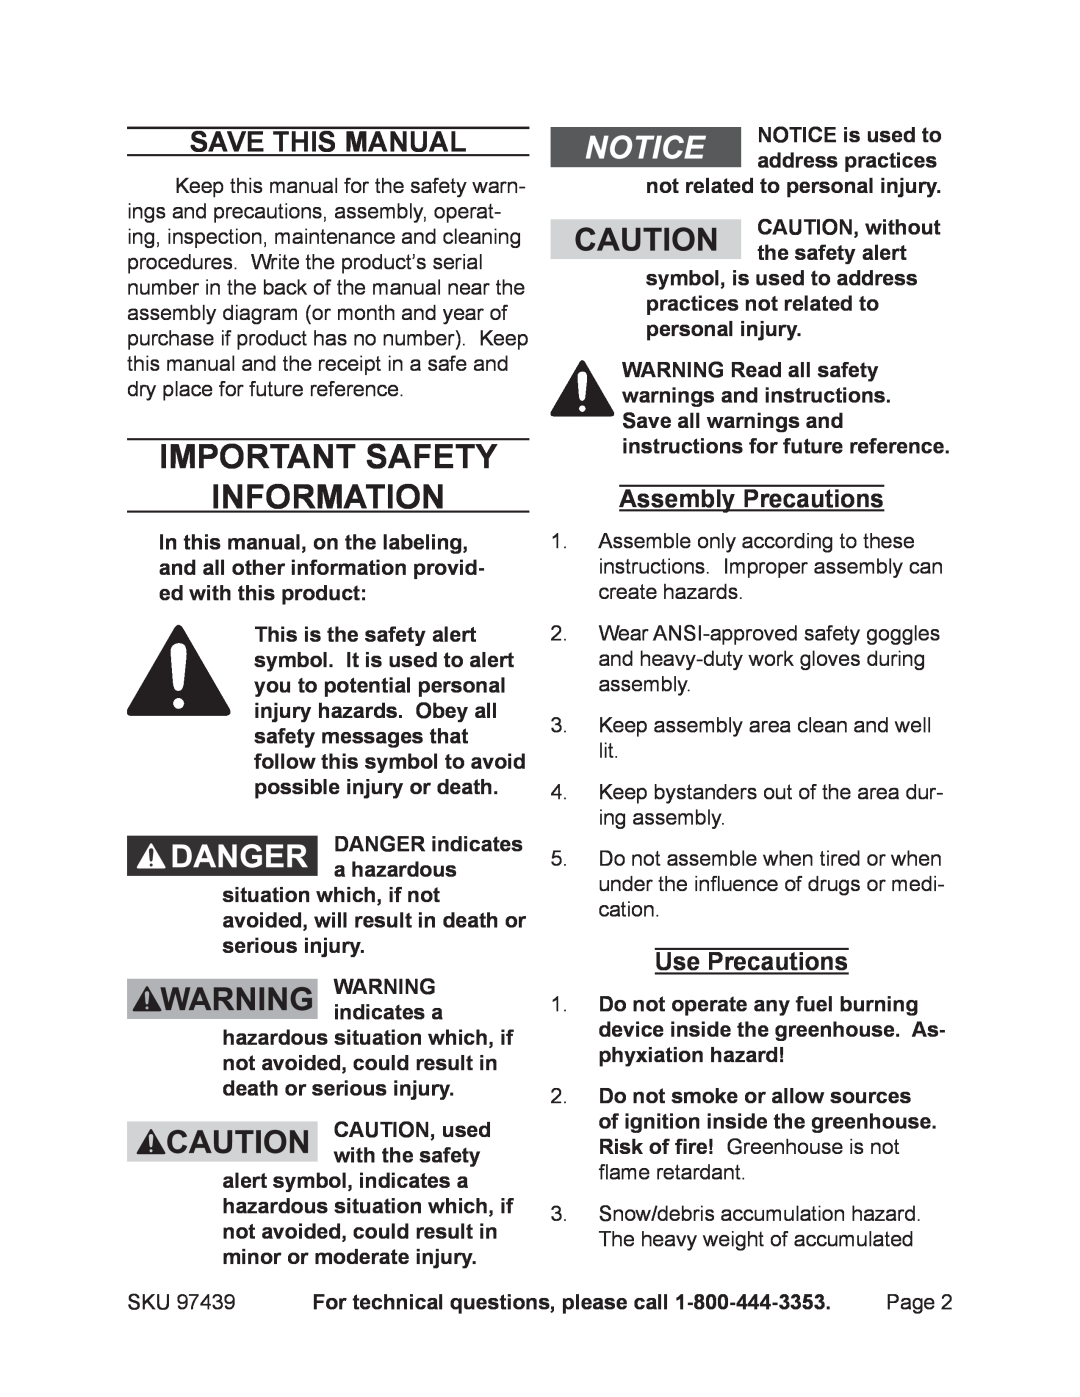 Harbor Freight Tools 97439 manual Important SAFETY Information, Save This Manual, Assembly Precautions, Use Precautions 